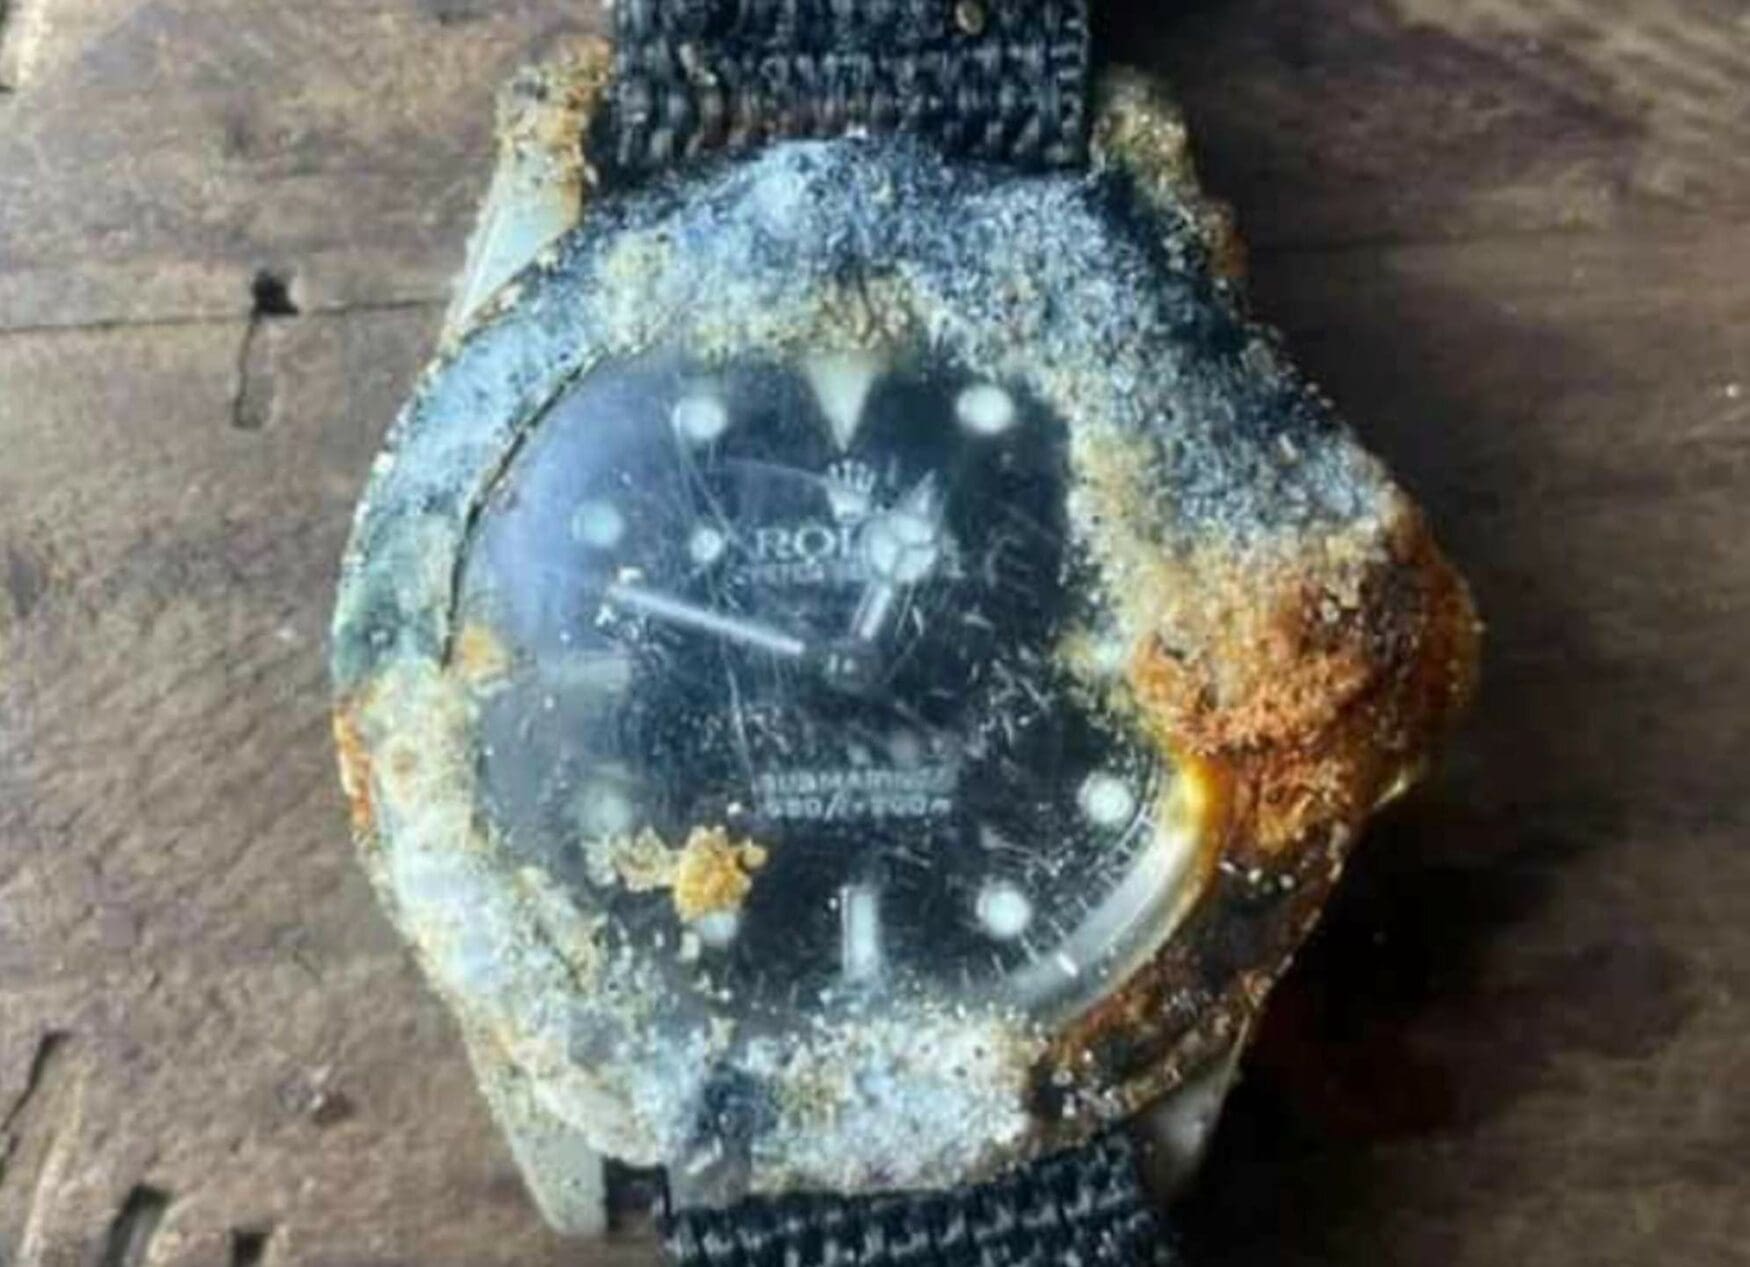 When “tropical” and “ghost bezel” don’t cut it. Describe the condition of this Rolex salvaged from the bottom of the ocean